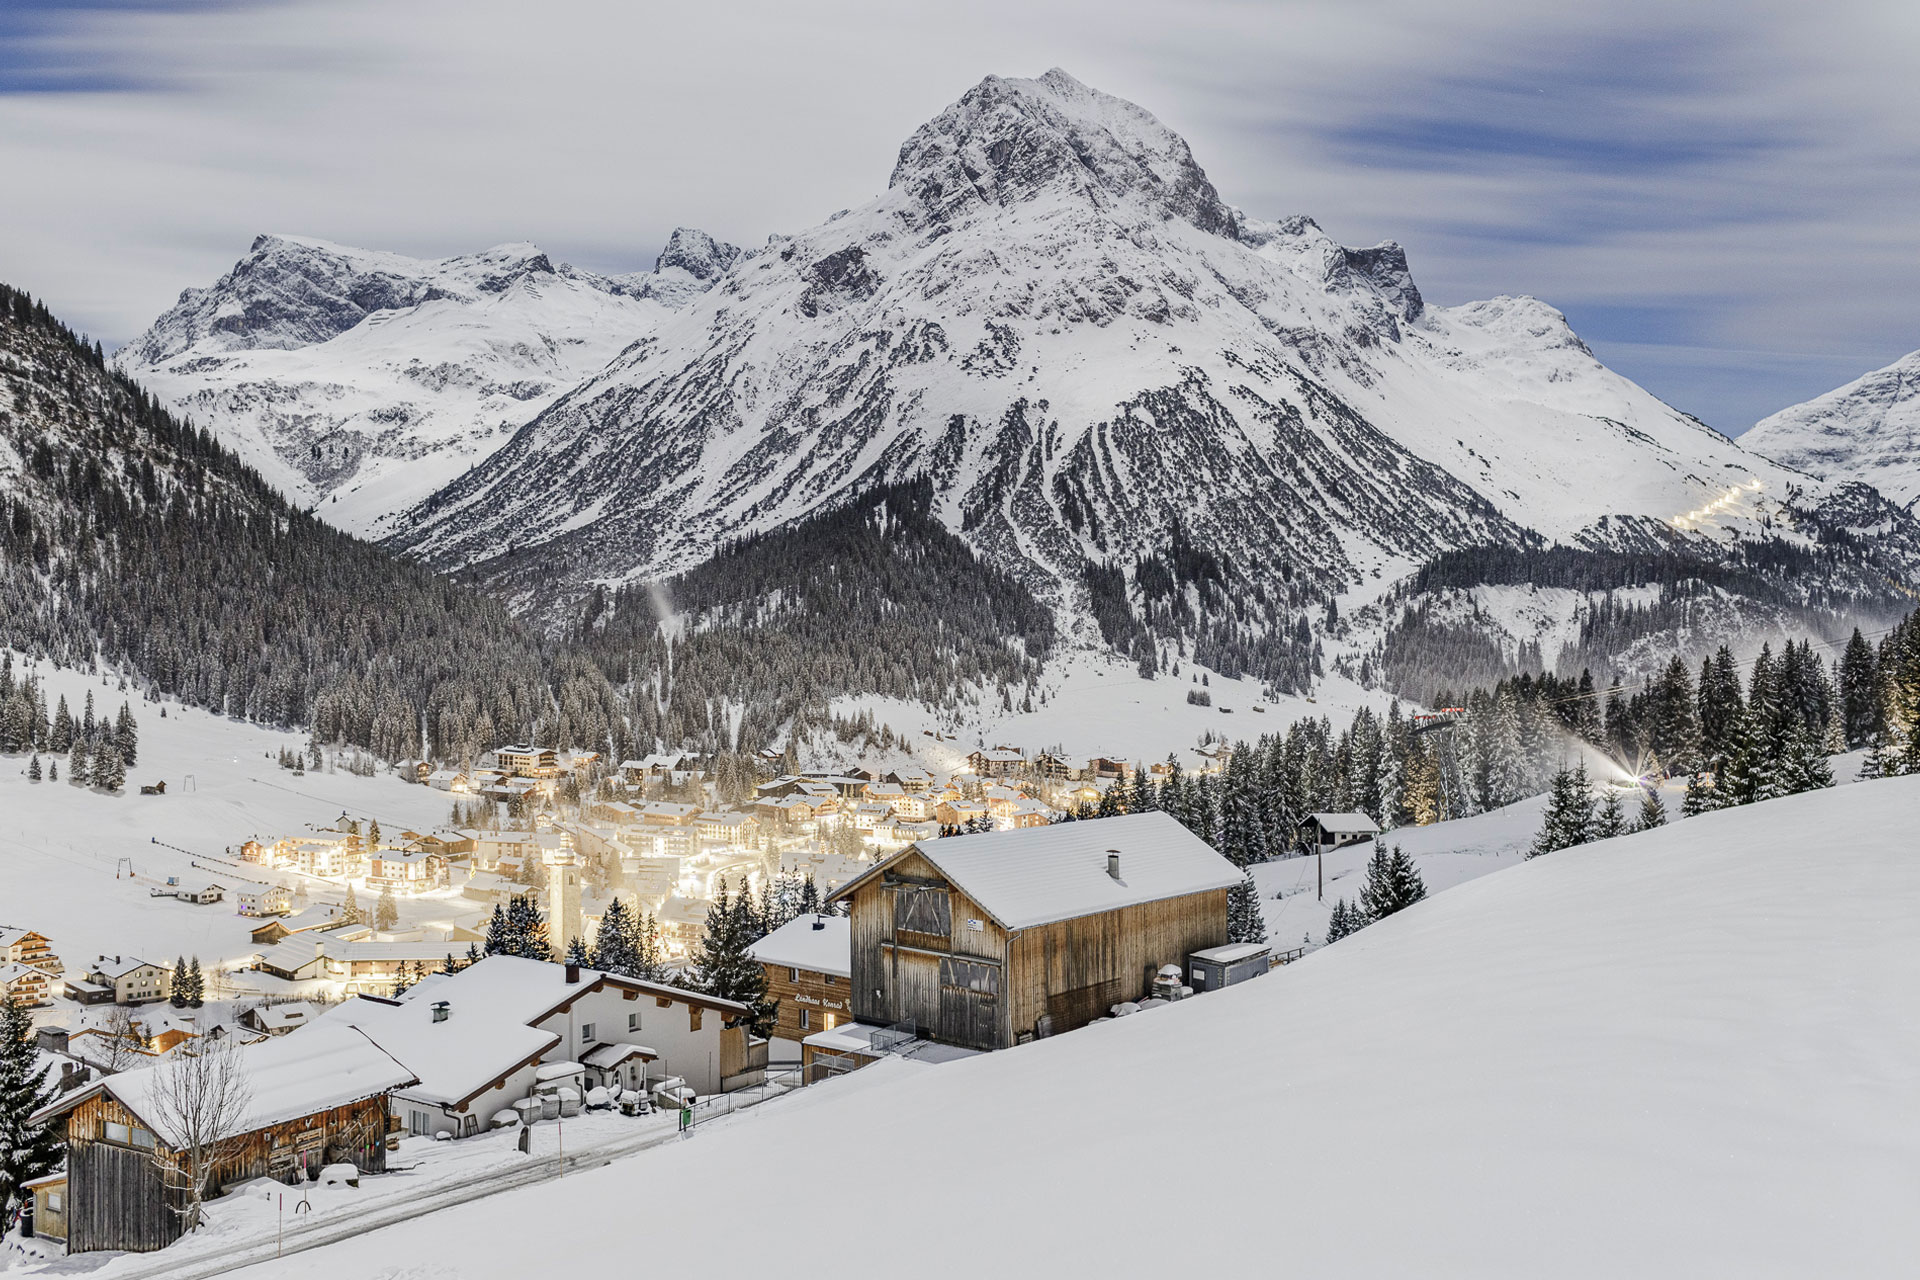 £40,000 A Night: Inside One Of The Most Swish Stays In The Austrian Alps – Lech Valley’s Arula Chalets